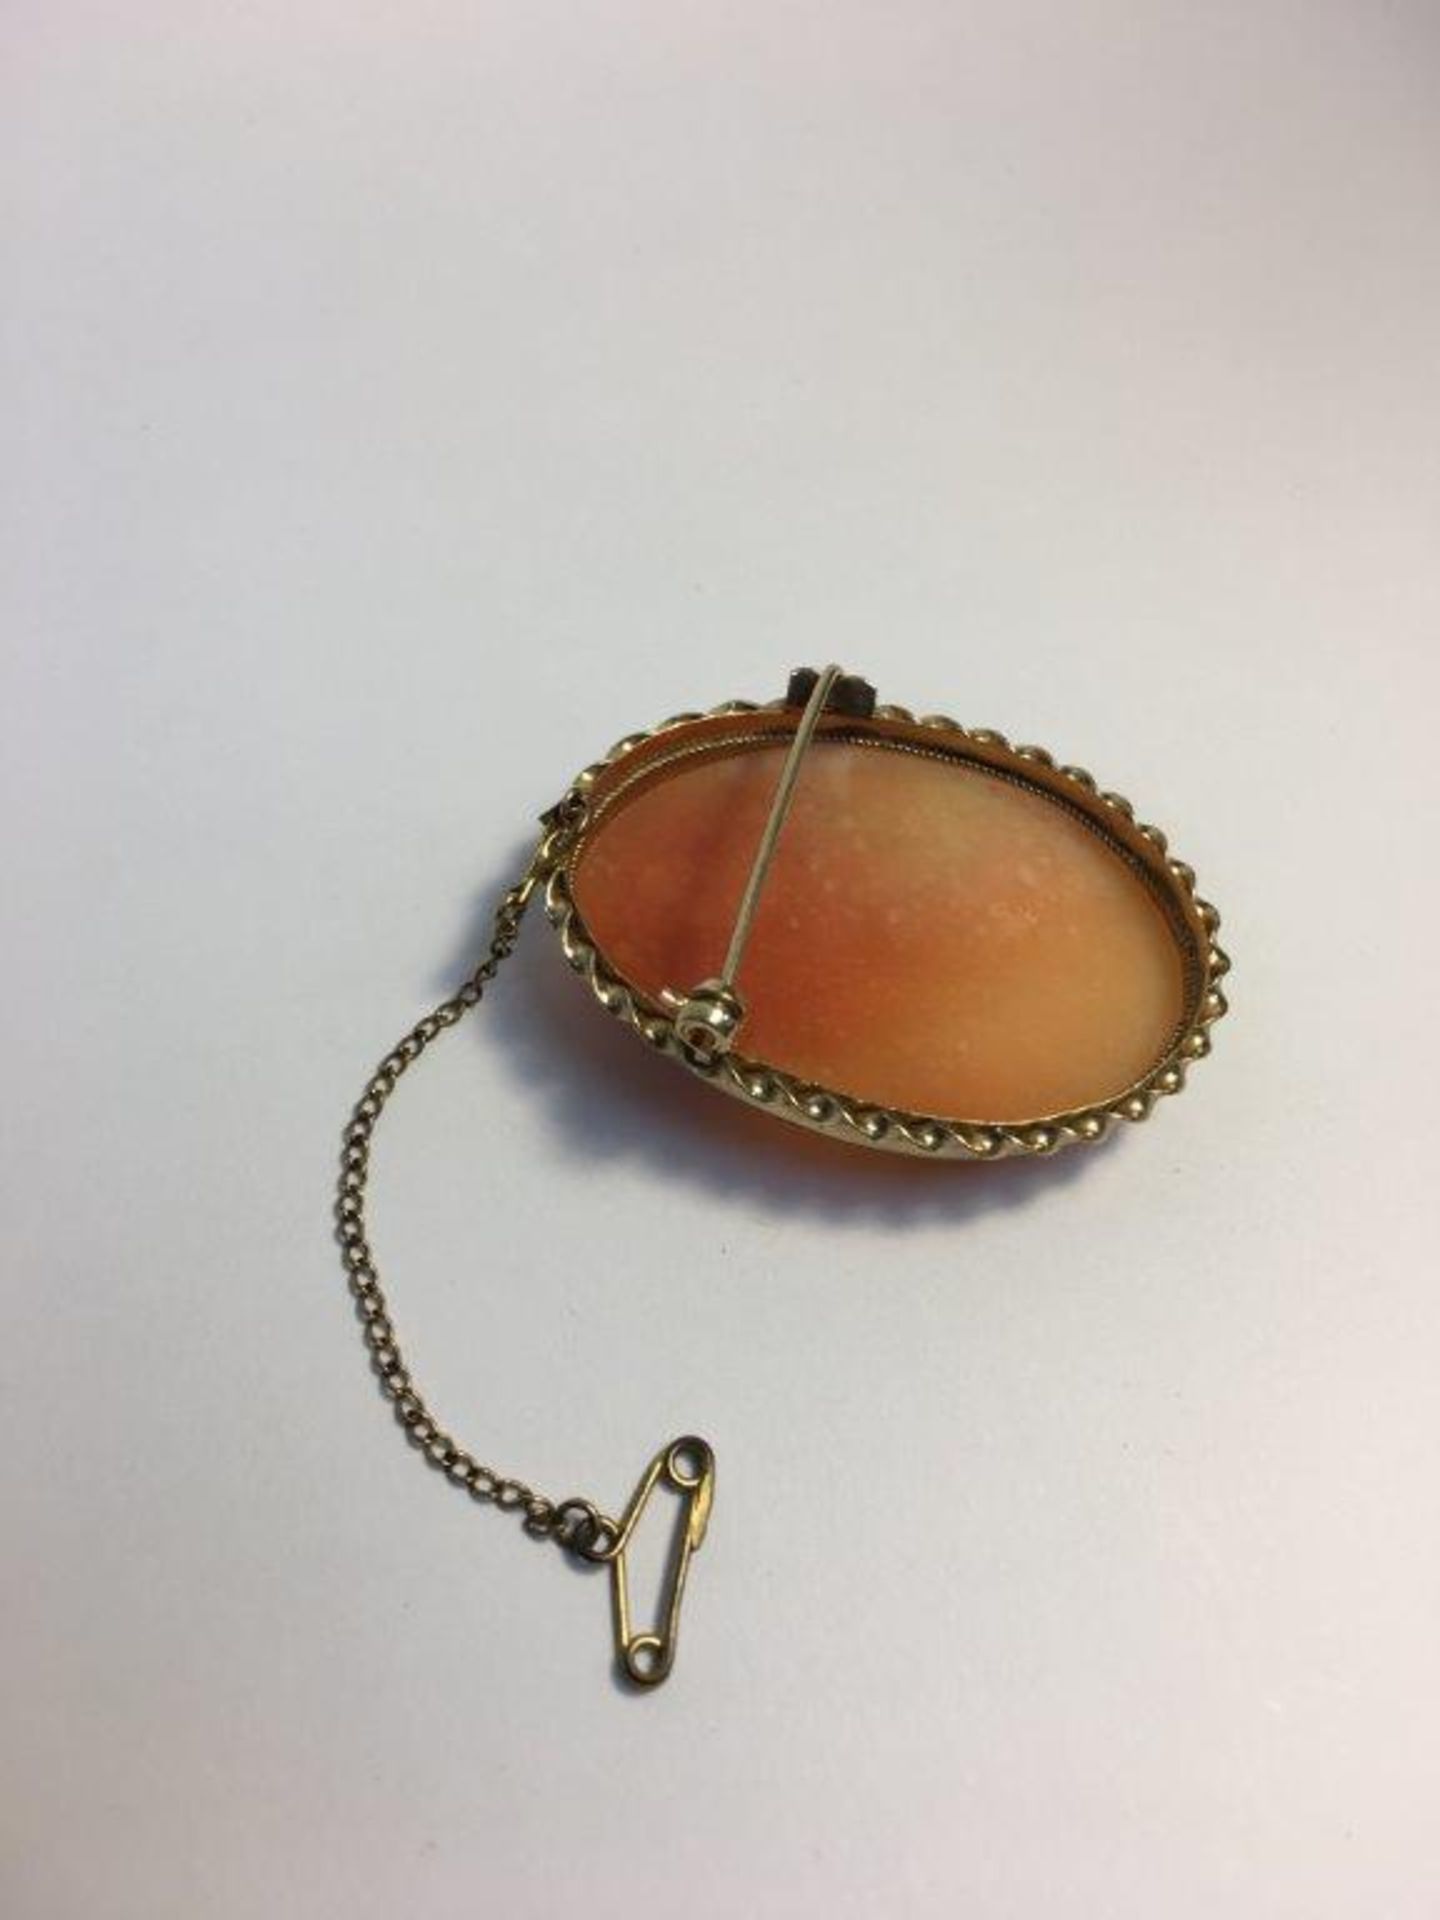 9ct Oval cameo brooch in yellow gold - Image 3 of 3